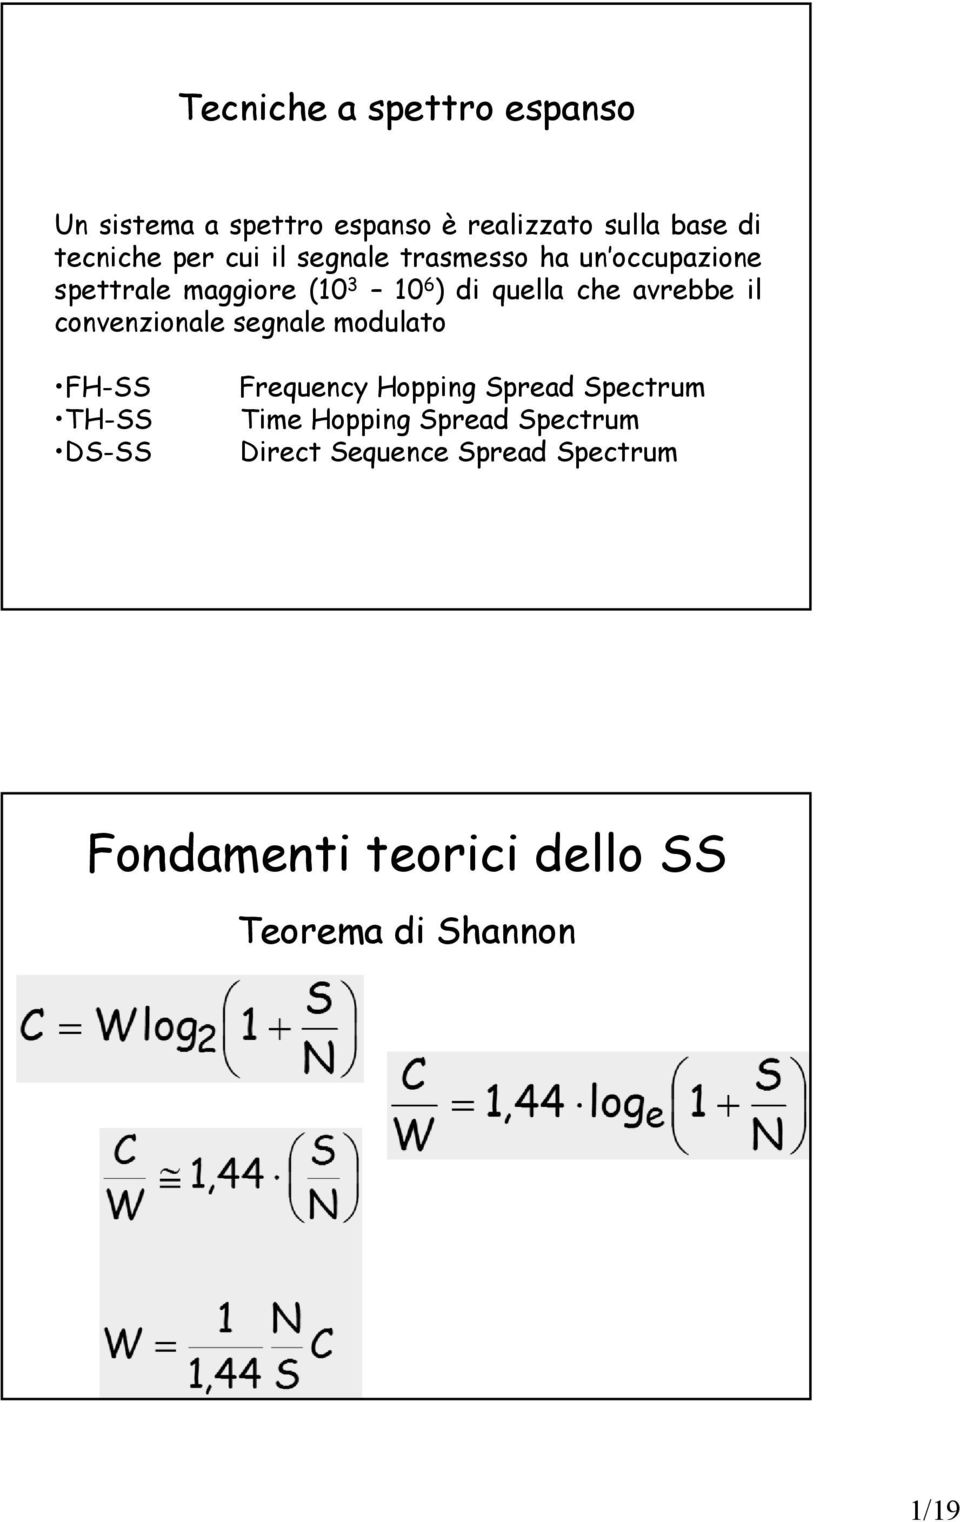 il convenzionale segnale modulato FH-SS TH-SS DS-SS Frequency Hopping Spread Spectrum Time